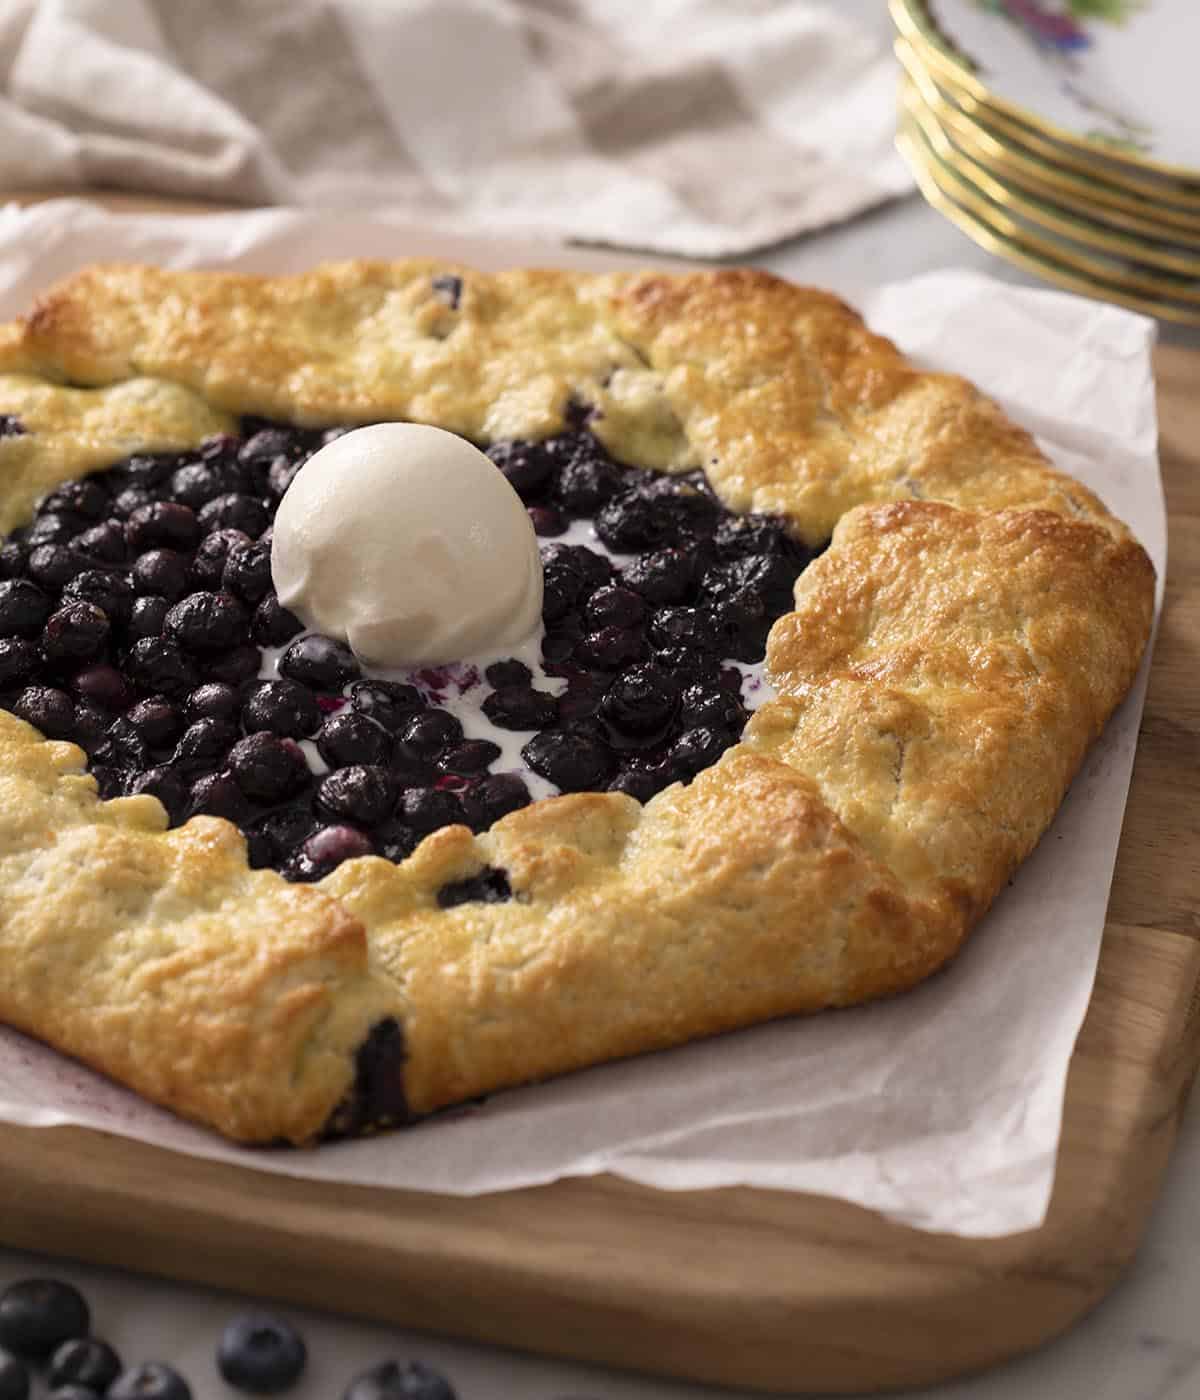 A closeup photo of a blueberry galette with a scoop of vanilla ice cream on top.